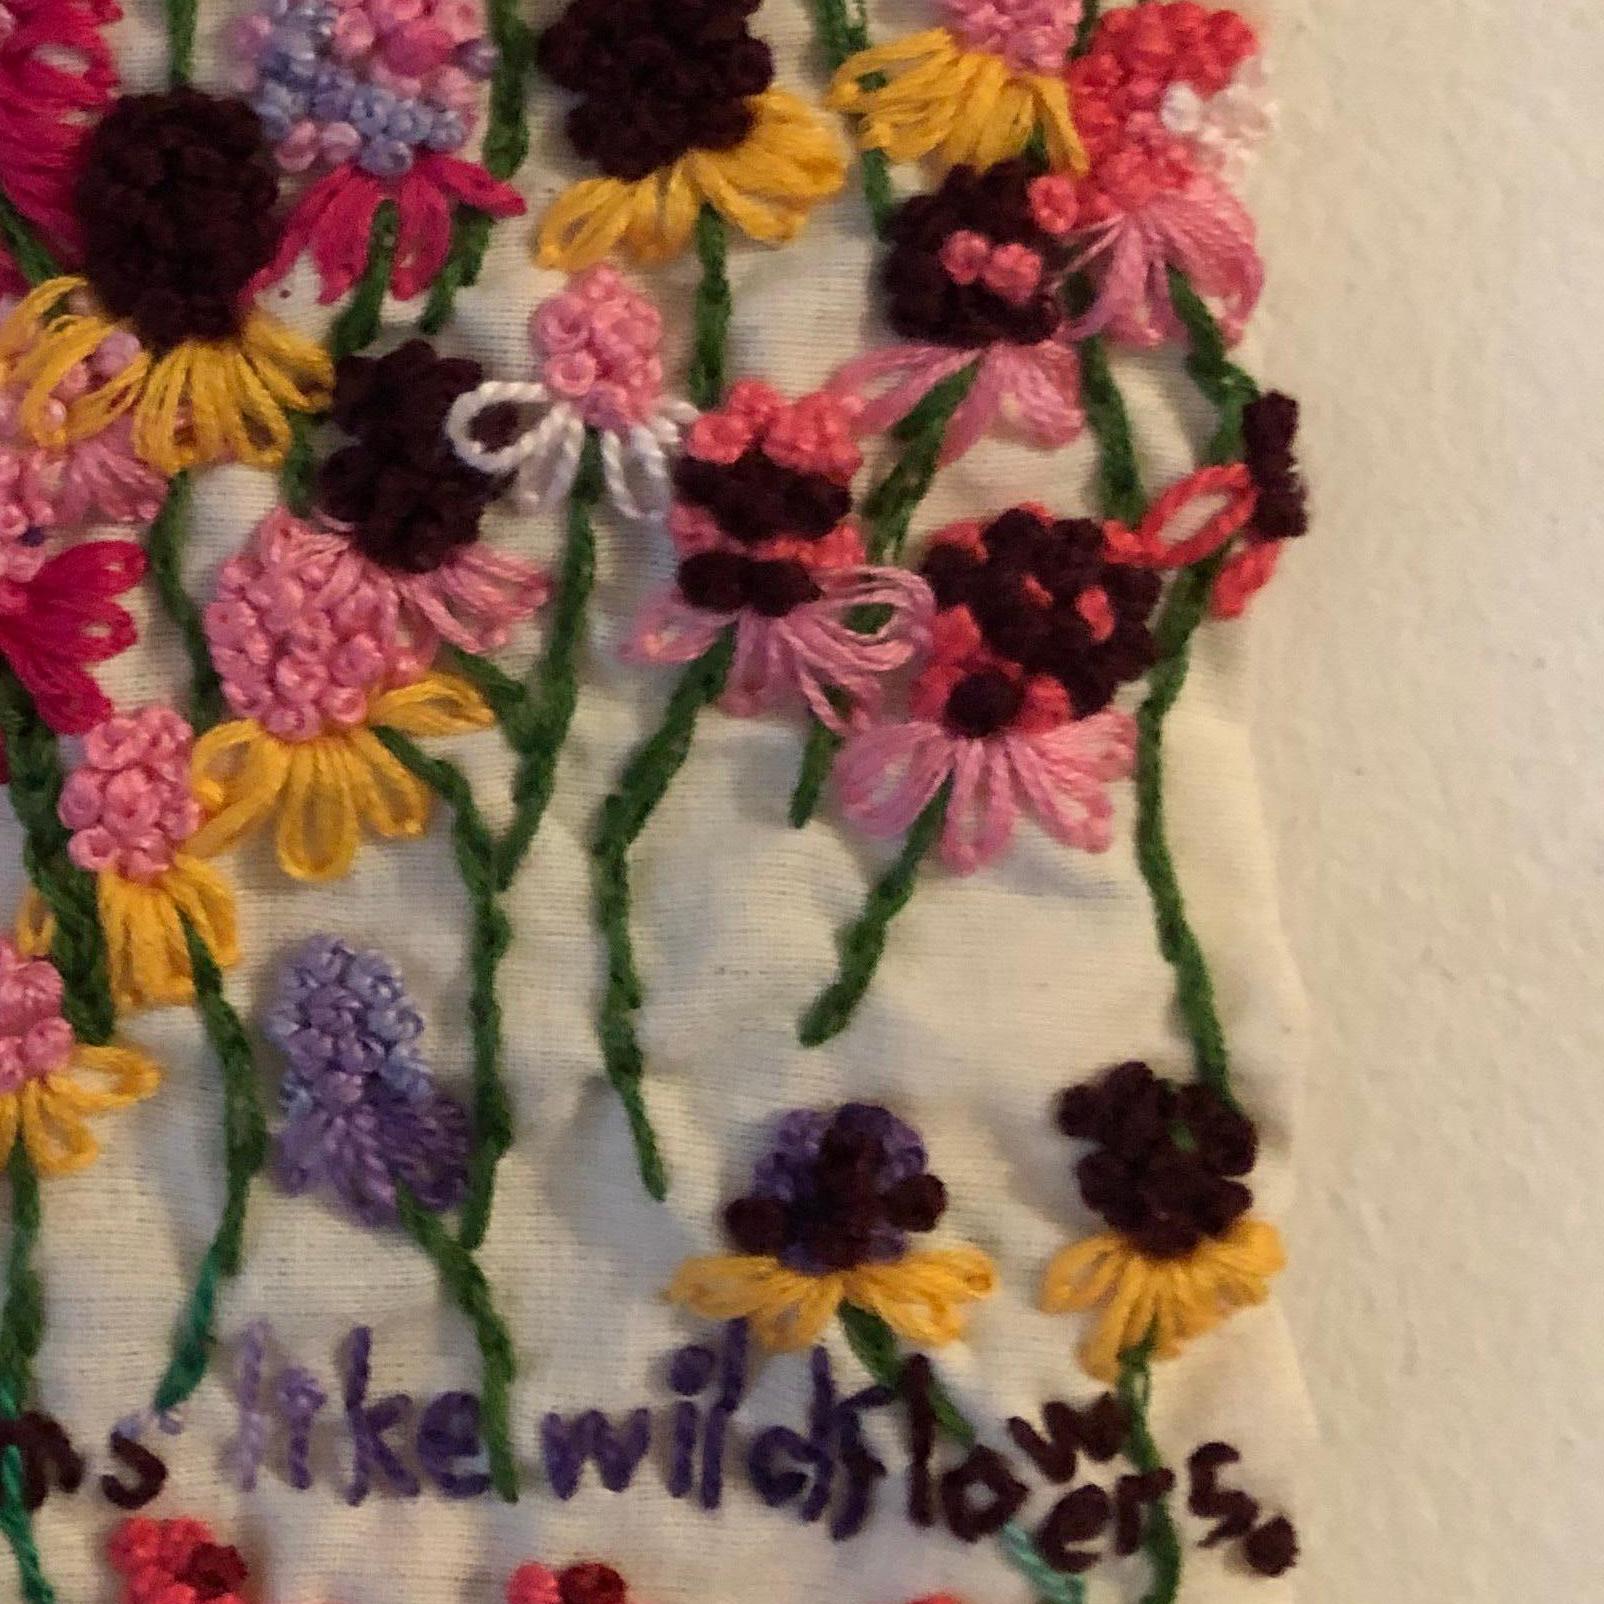 Our love blooms like wild flowers - narrative floral embroidered on fabric  1